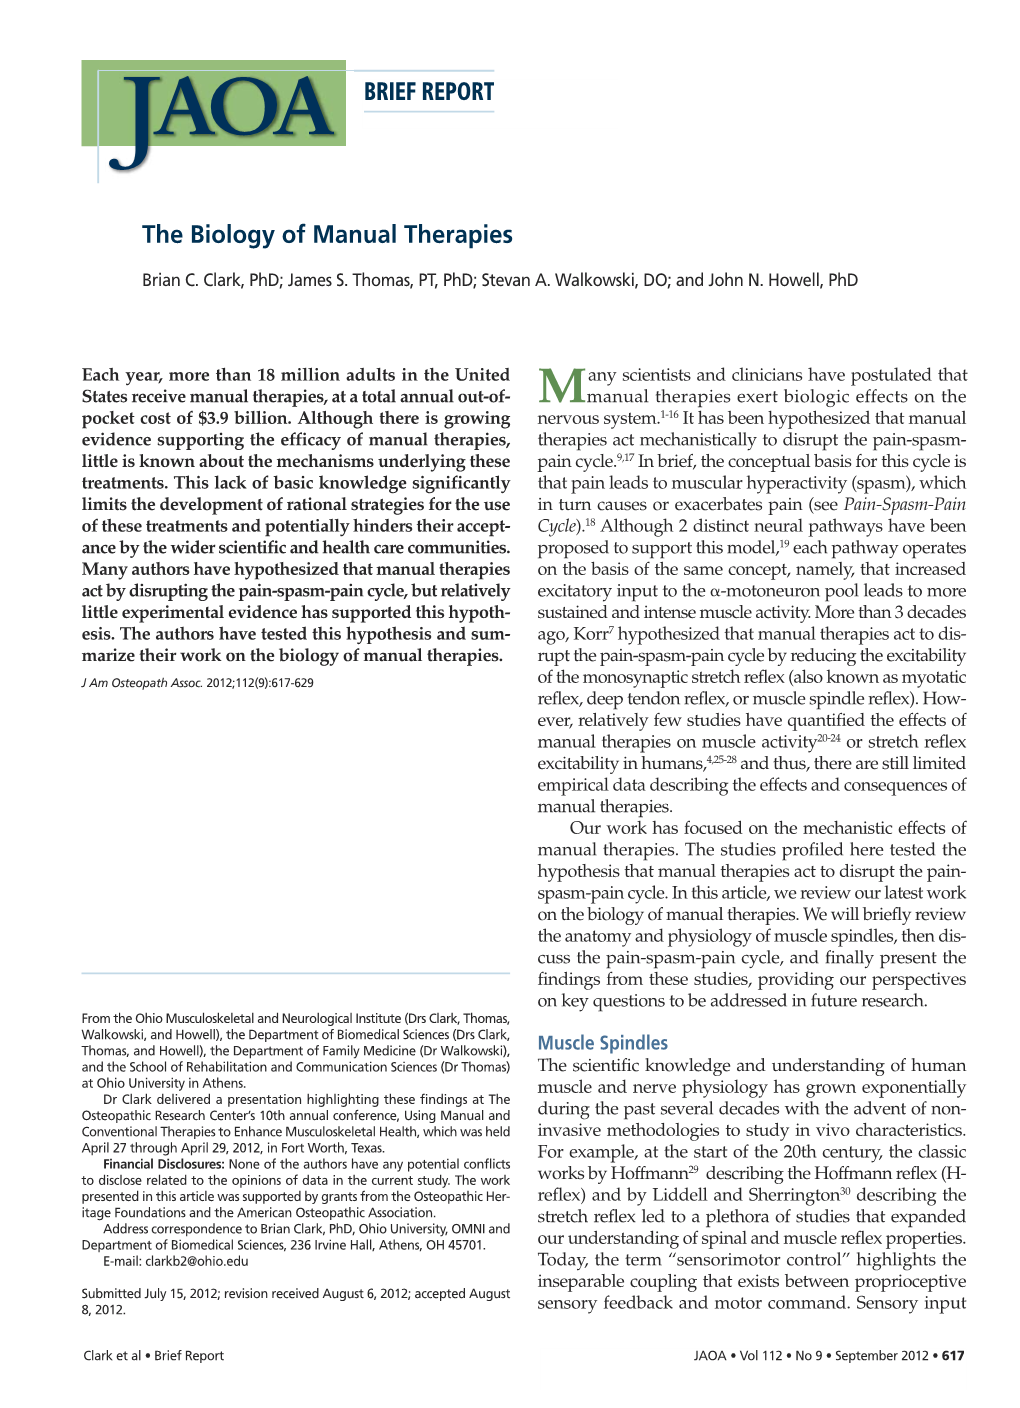 BRIEF REPORT the Biology of Manual Therapies